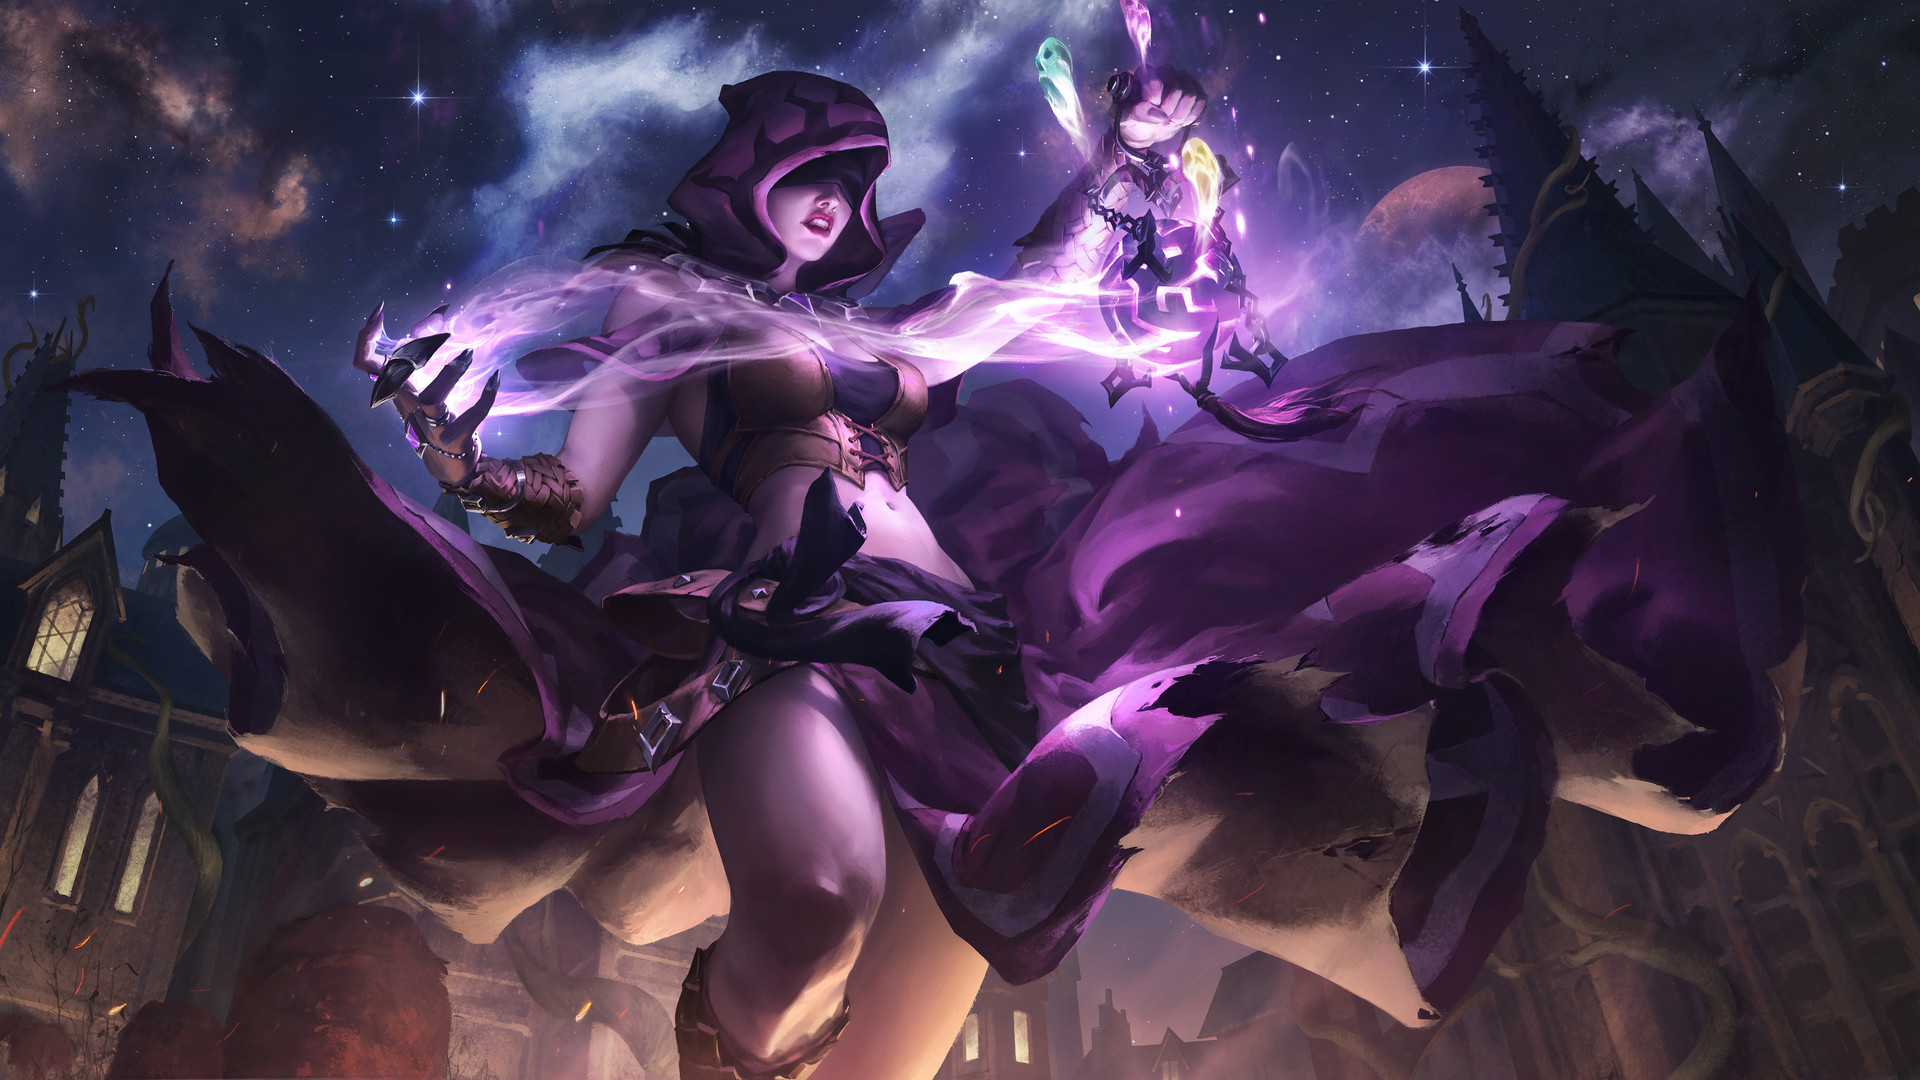 General 1920x1080 digital art artwork video games women fantasy art thighs belly tight clothing witch spell hoods mask Paladins: Champions of the Realm